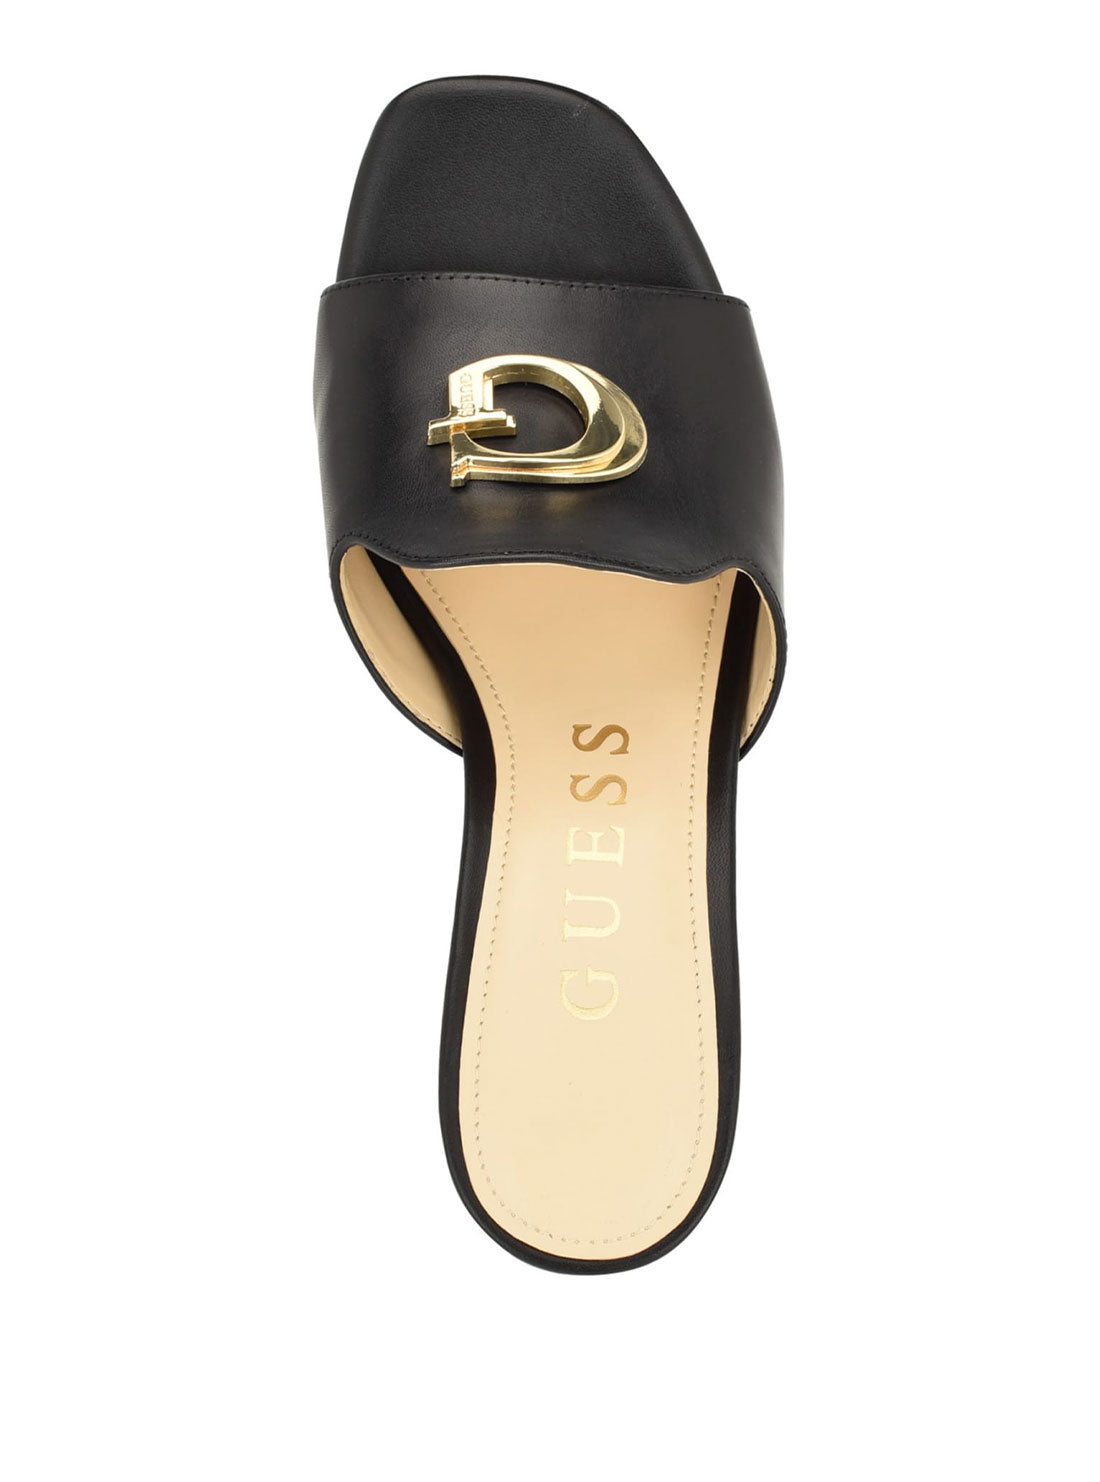 GUESS Black Gold G Logo Snapps Heel top view